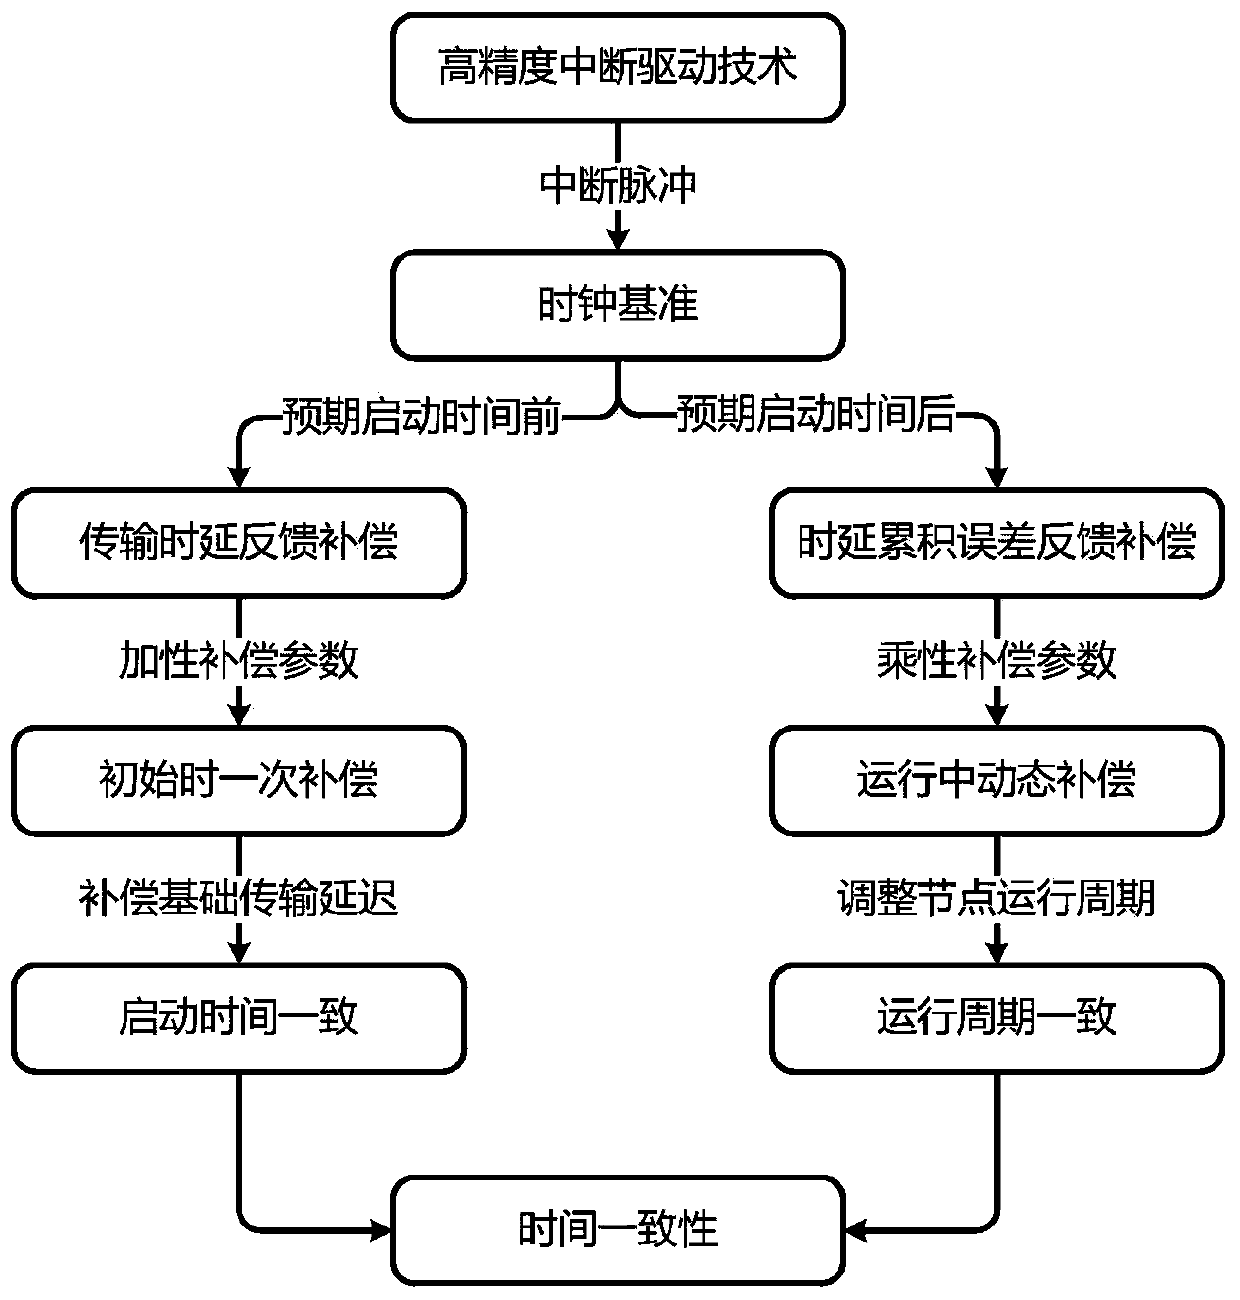 Time consistency control method oriented to cooperative guidance simulation system